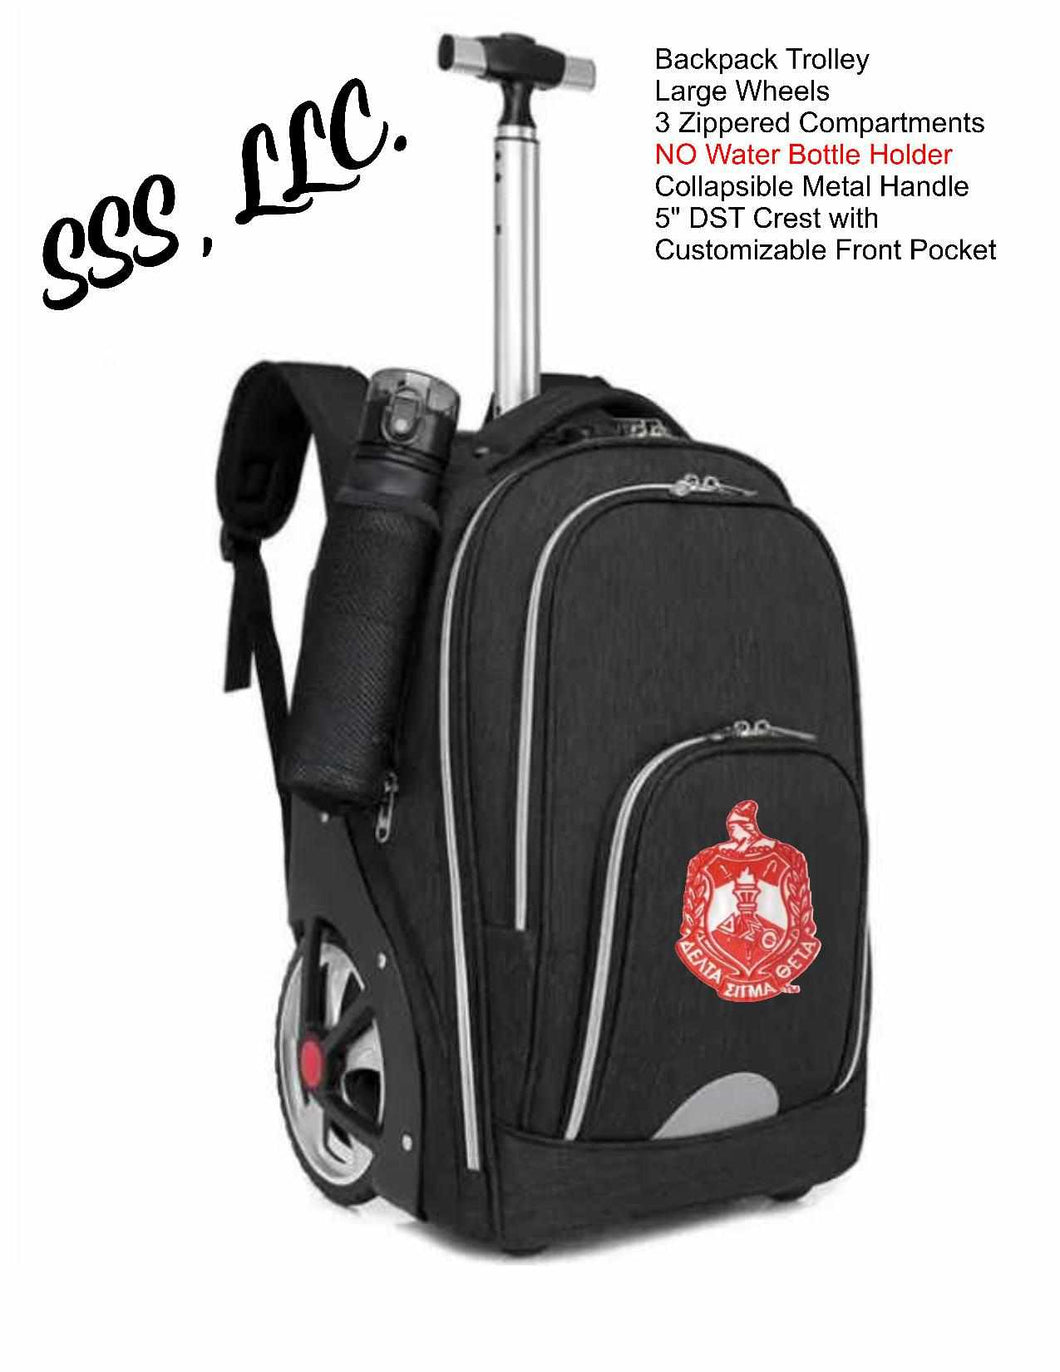 DST Trolley Backpack with Large Wheels and Customizable Front Pocket